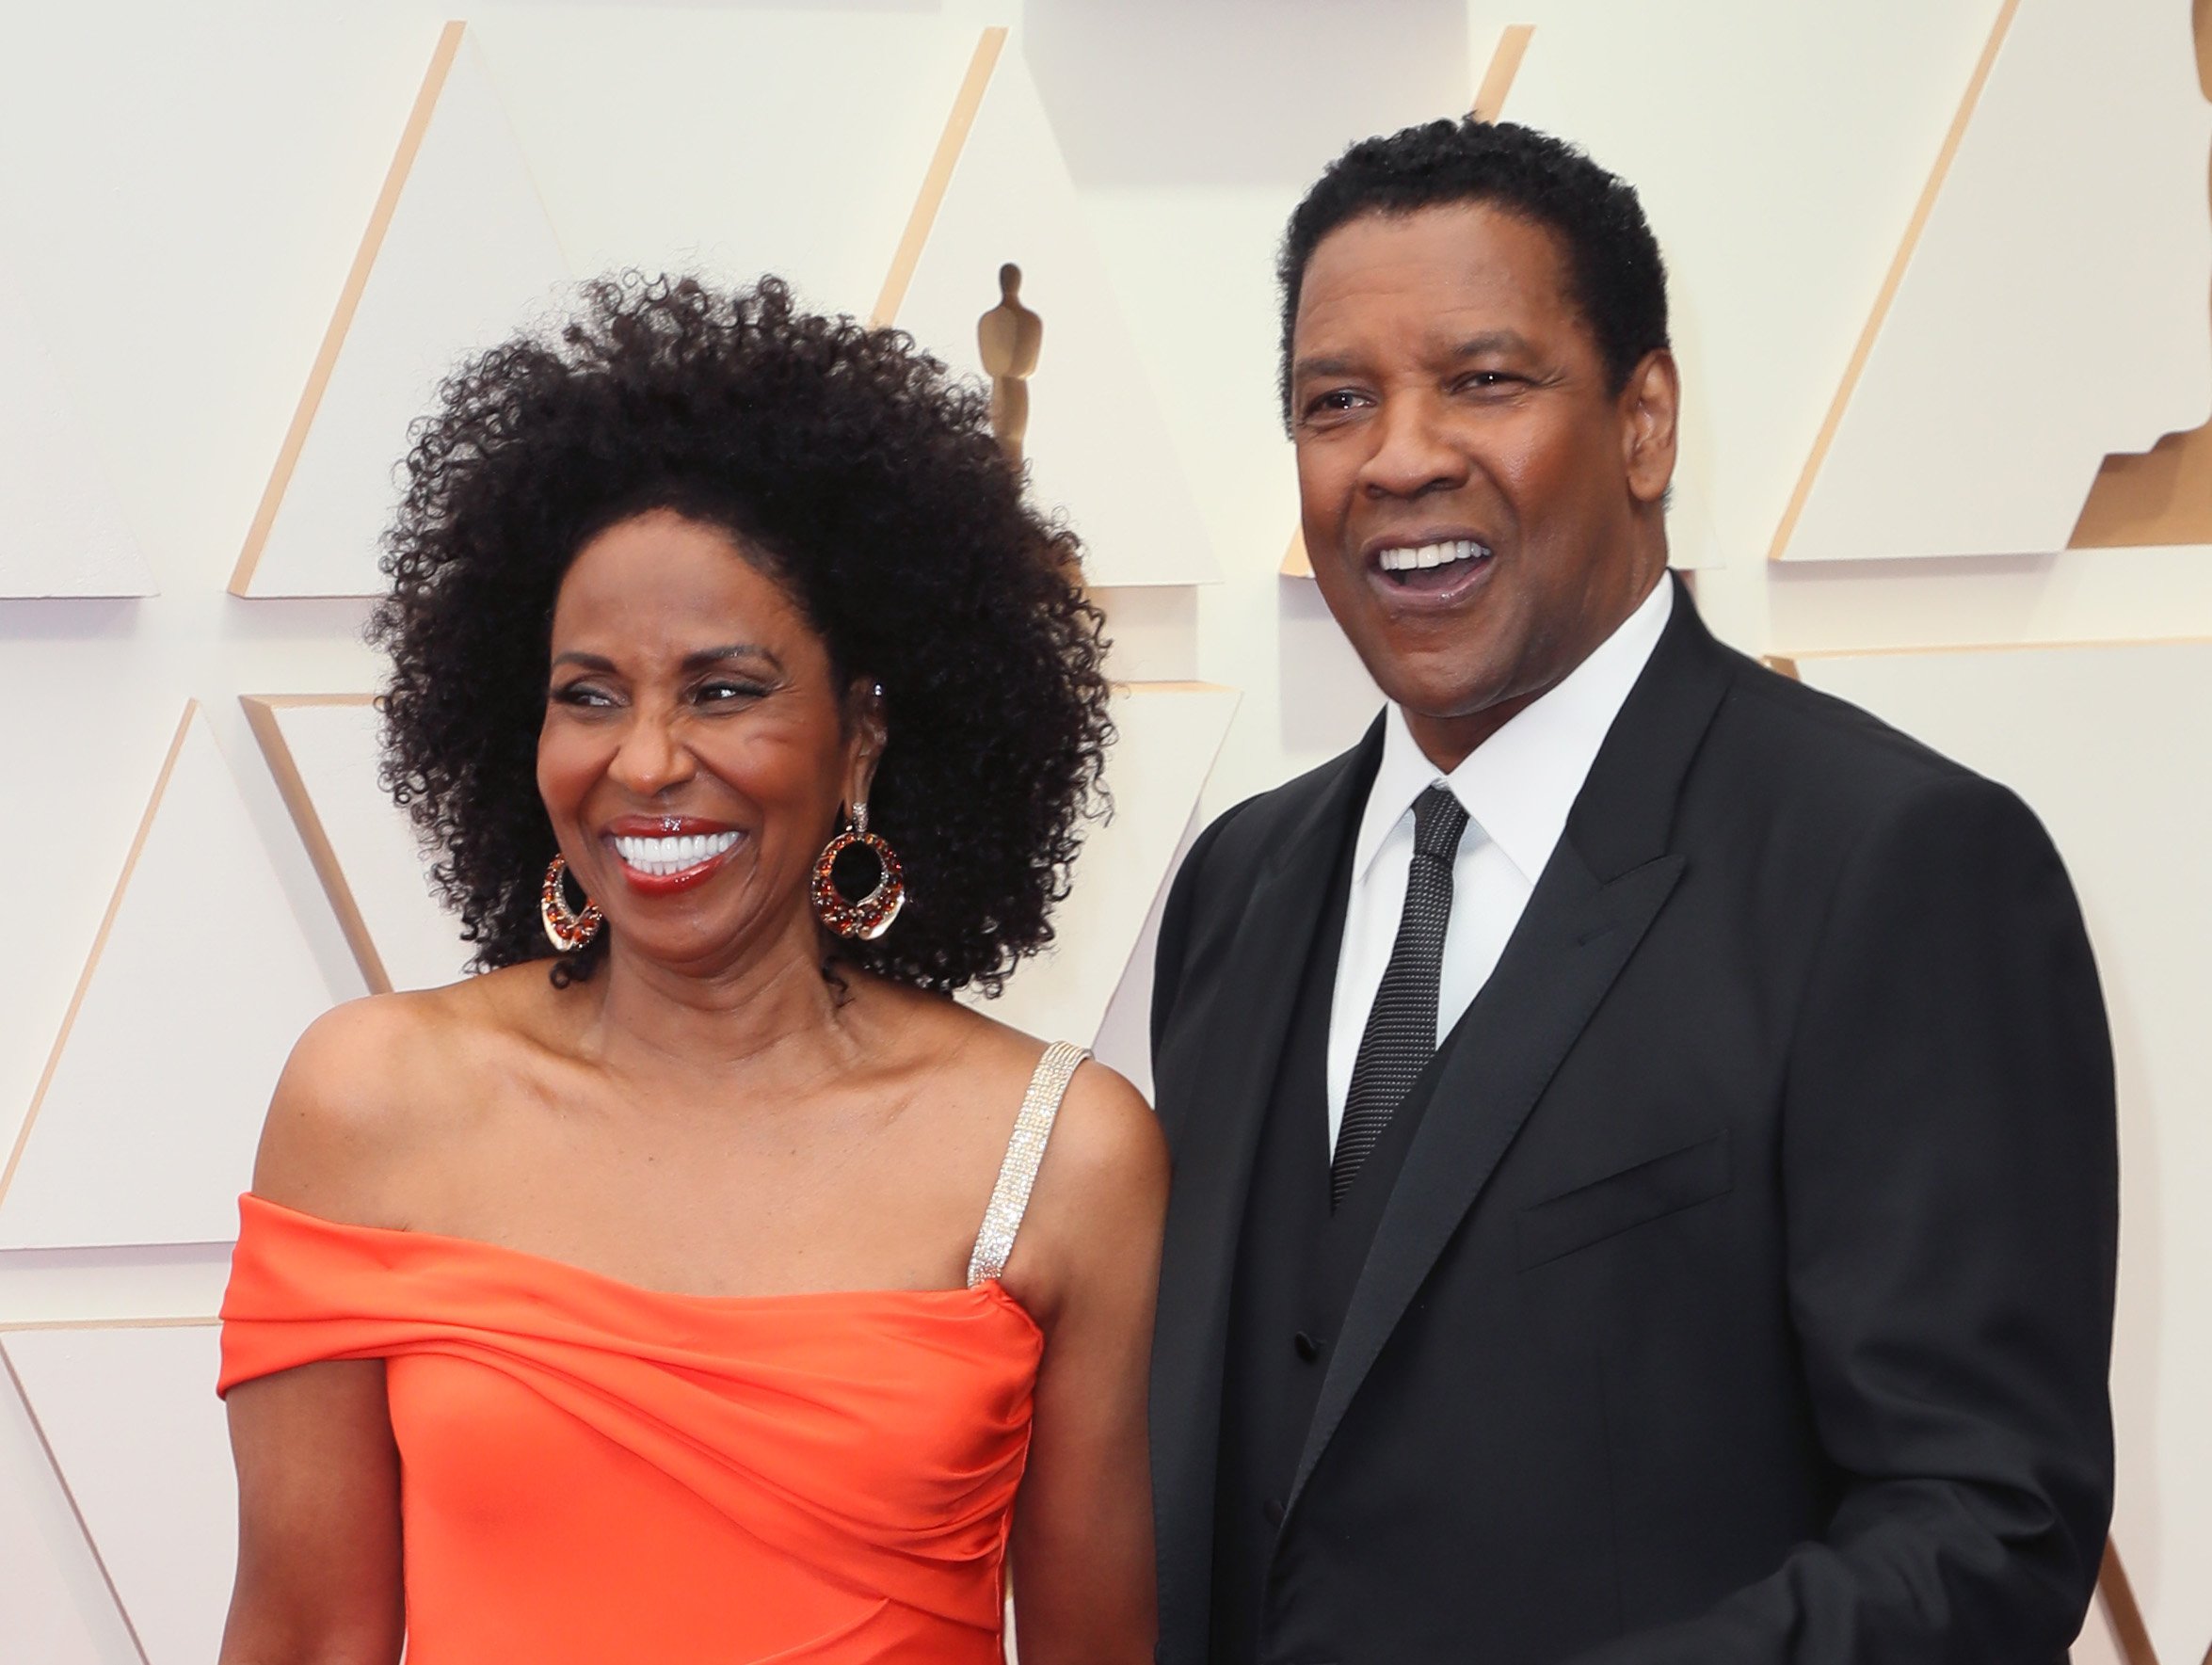 Pauletta Washington and Denzel Washington at the 94th Annual Academy Awards at Hollywood and Highland on March 27, 2022 in Hollywood, California. | Source: Getty Images